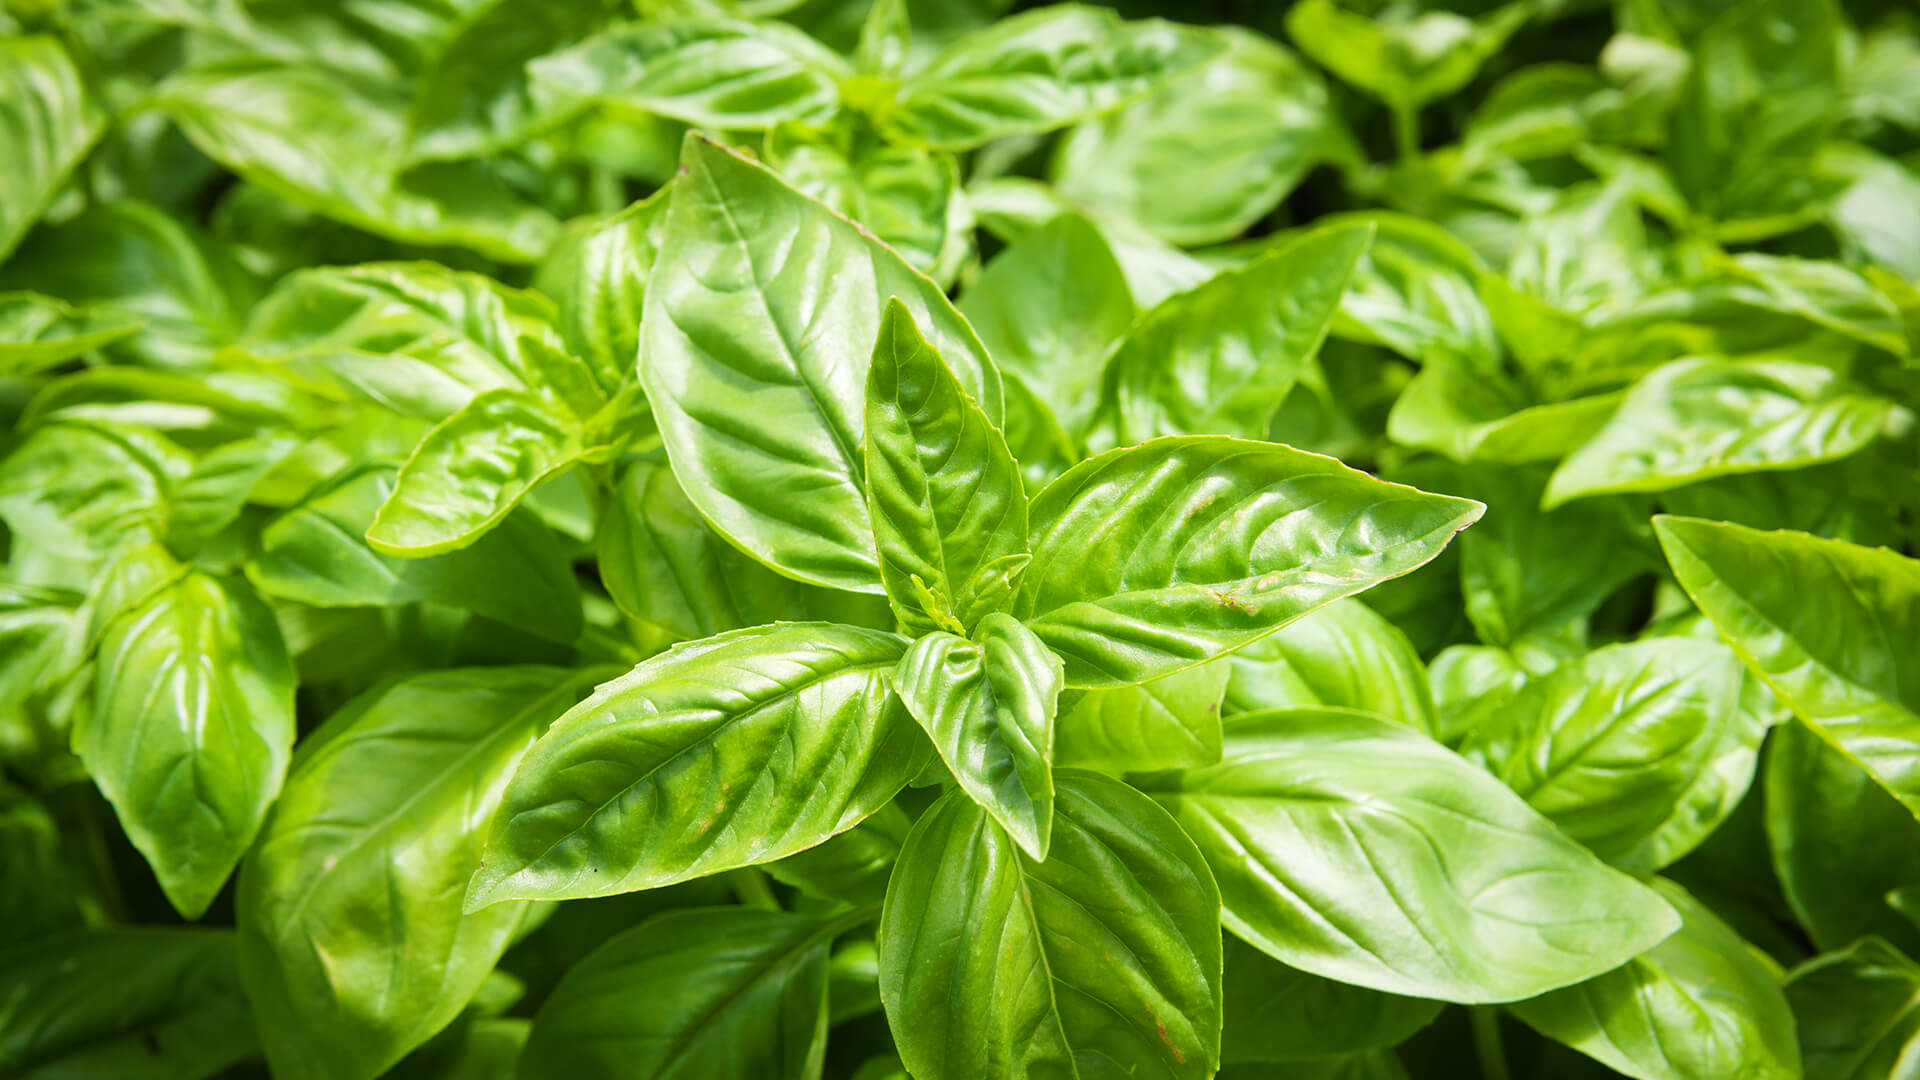 A tight cluster of basil leaves.